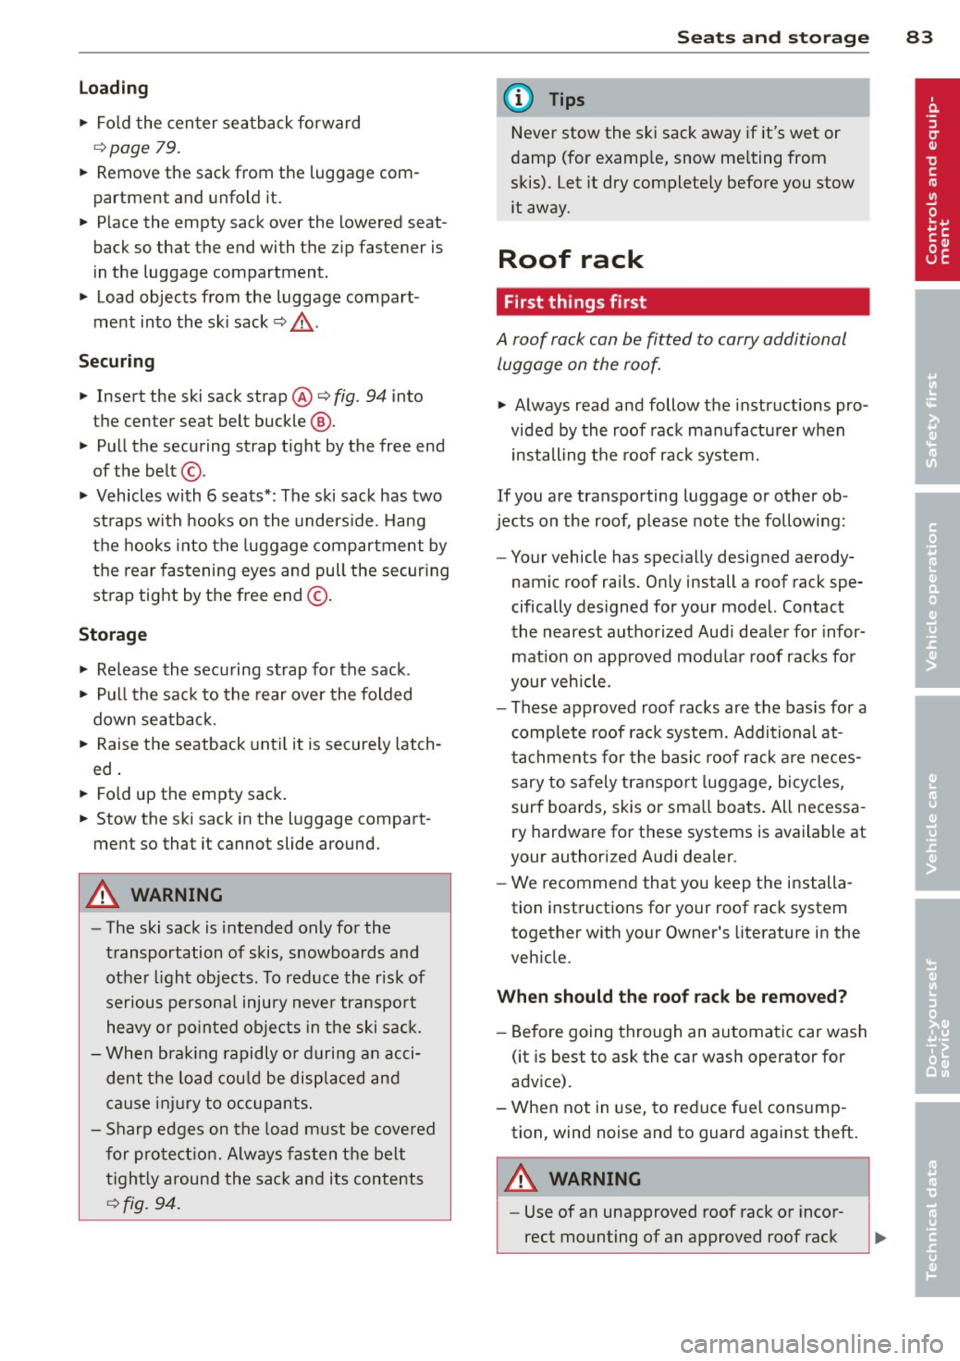 AUDI Q7 2013  Owner´s Manual Lo adin g 
" Fo ld  the  center  seatback  forward 
r=> page 79. 
"  Remove  the  sack  from  the  luggage  com ­
partment  and  unfold  it. 
"  Place  the  empty  sack  over  the  lowered  seat­